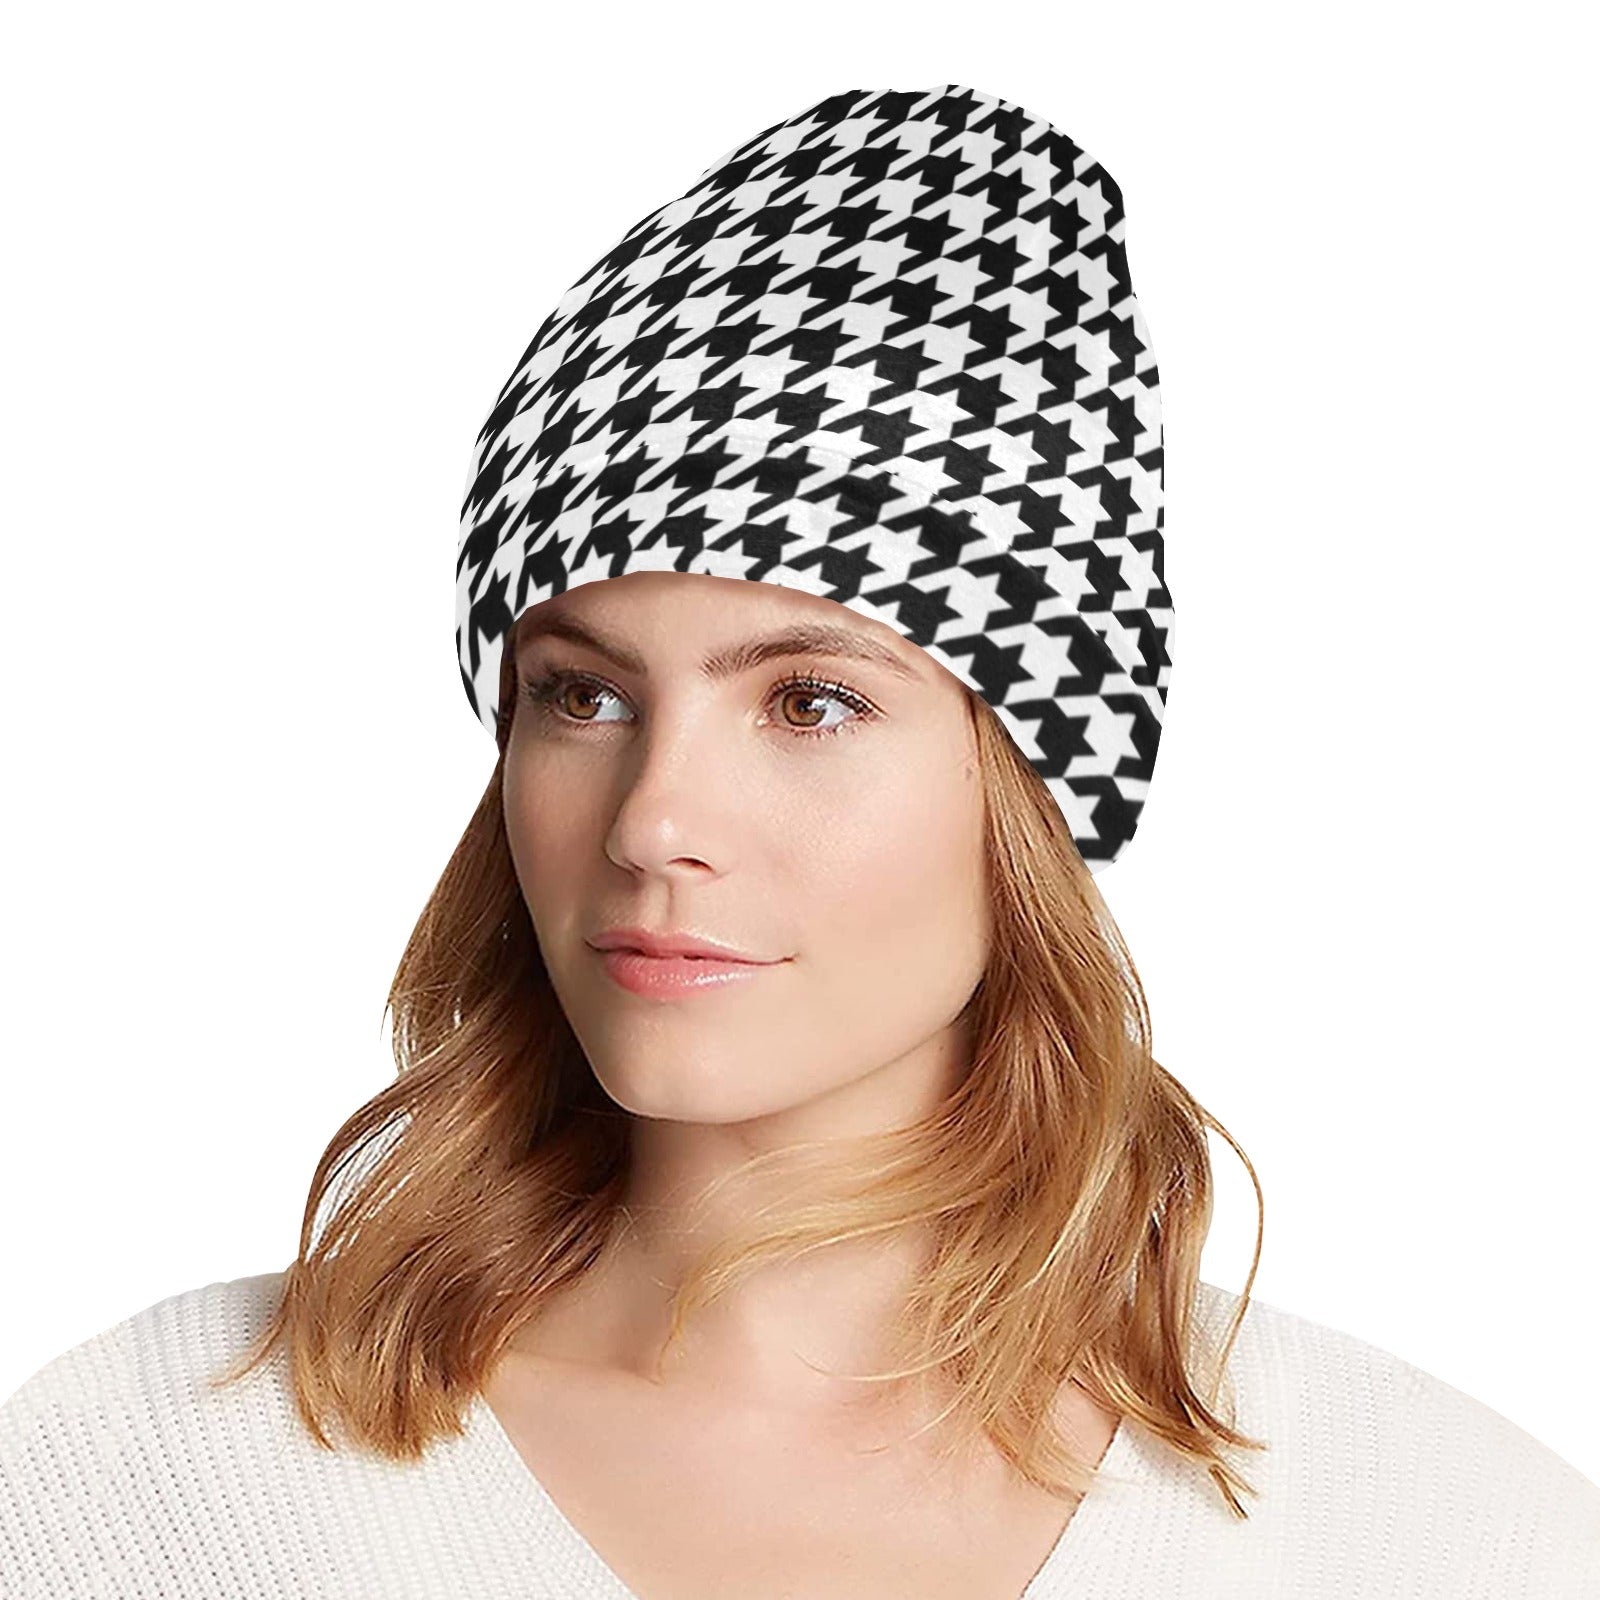 Houndstooth Beanie, Black White Pattern Soft Fleece Party Men Women Cute Stretchy Winter Adult Aesthetic Cap Hat Gift Starcove Fashion